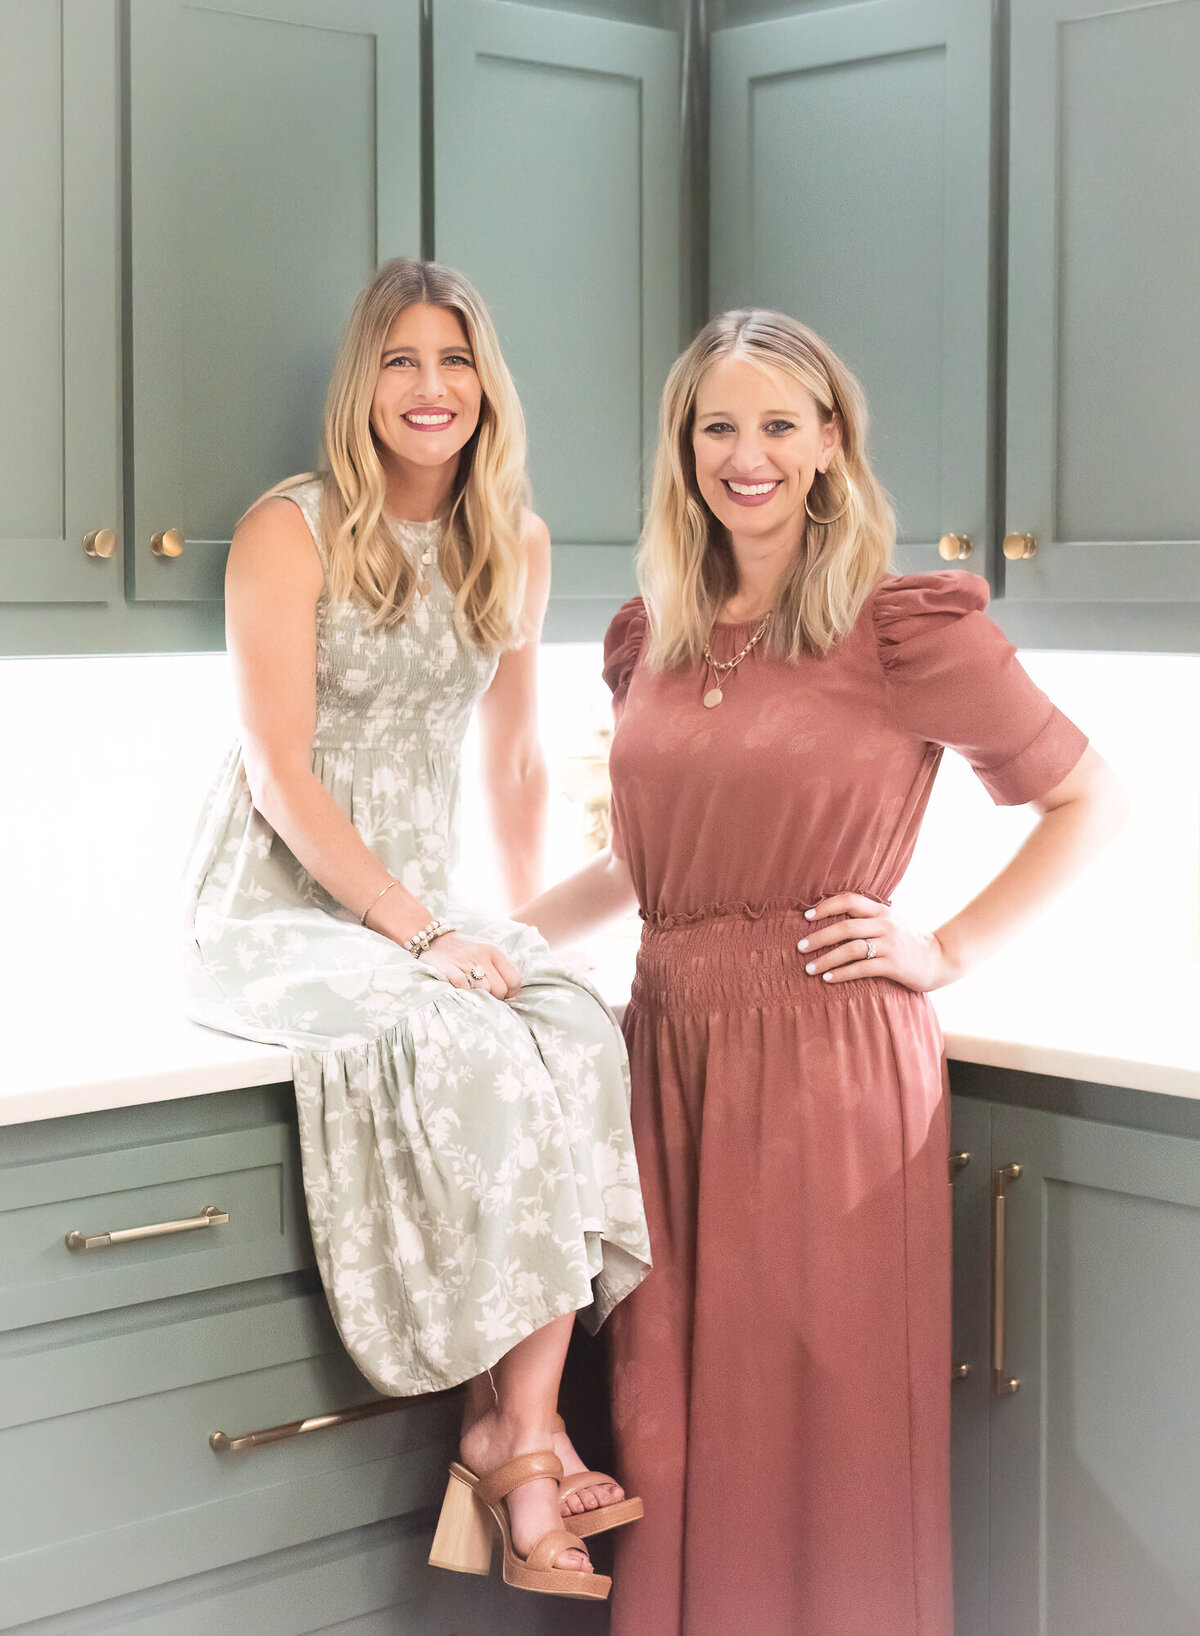 sister-owners of interior design company in the corner of the kitchen  smiling and looking happy